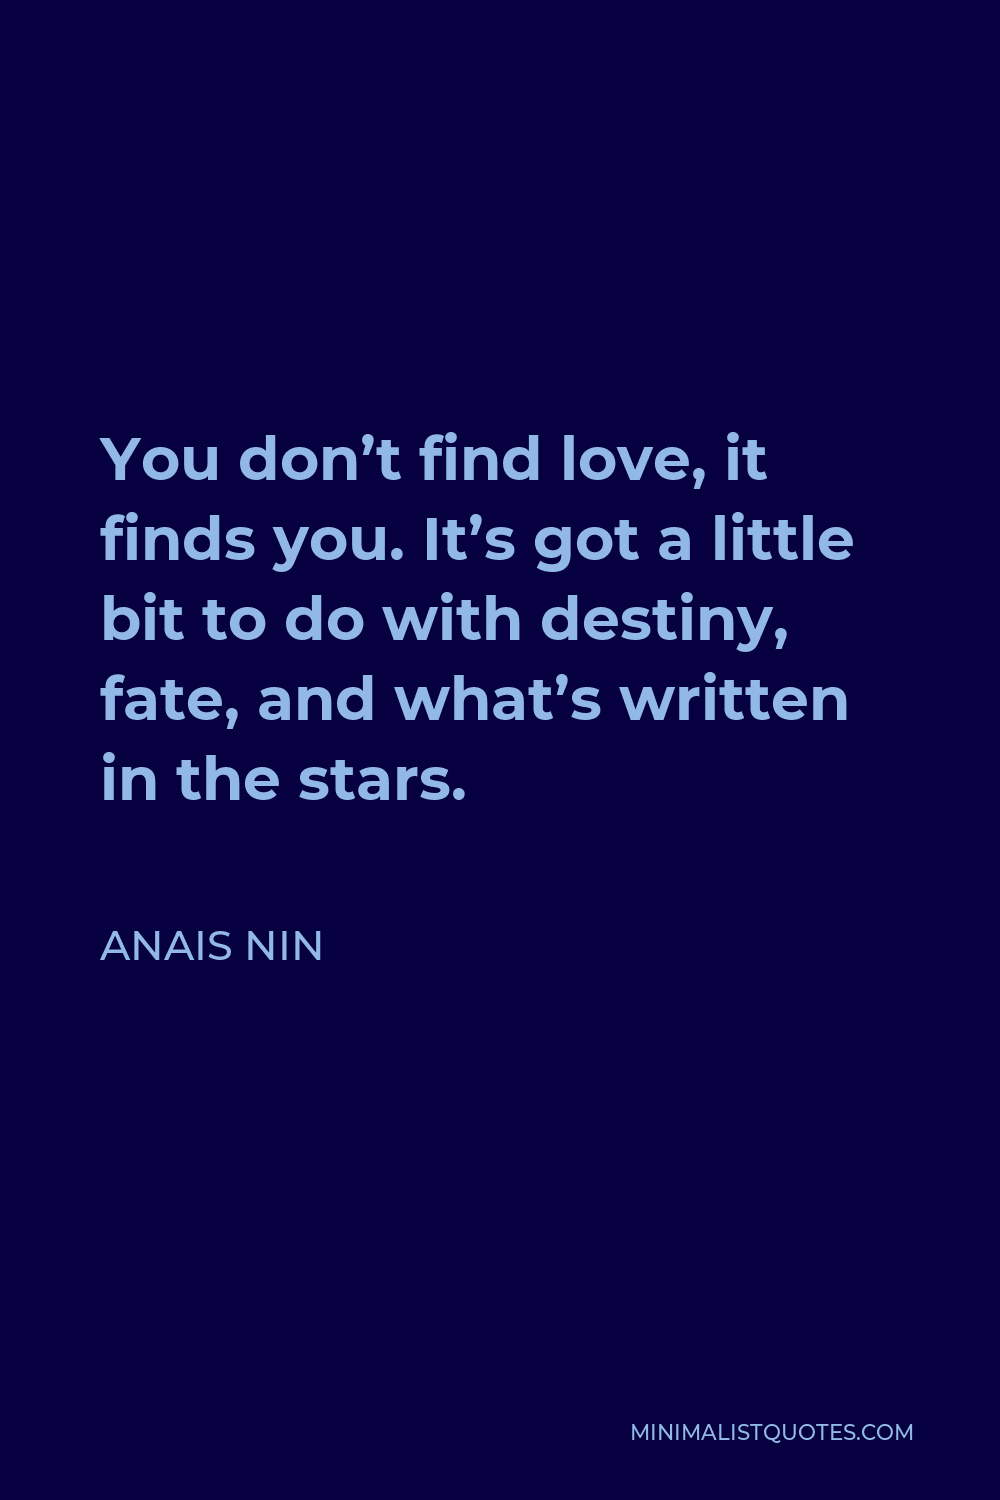 Anais Nin Quote - You don’t find love, it finds you. It’s got a little bit to do with destiny, fate, and what’s written in the stars.